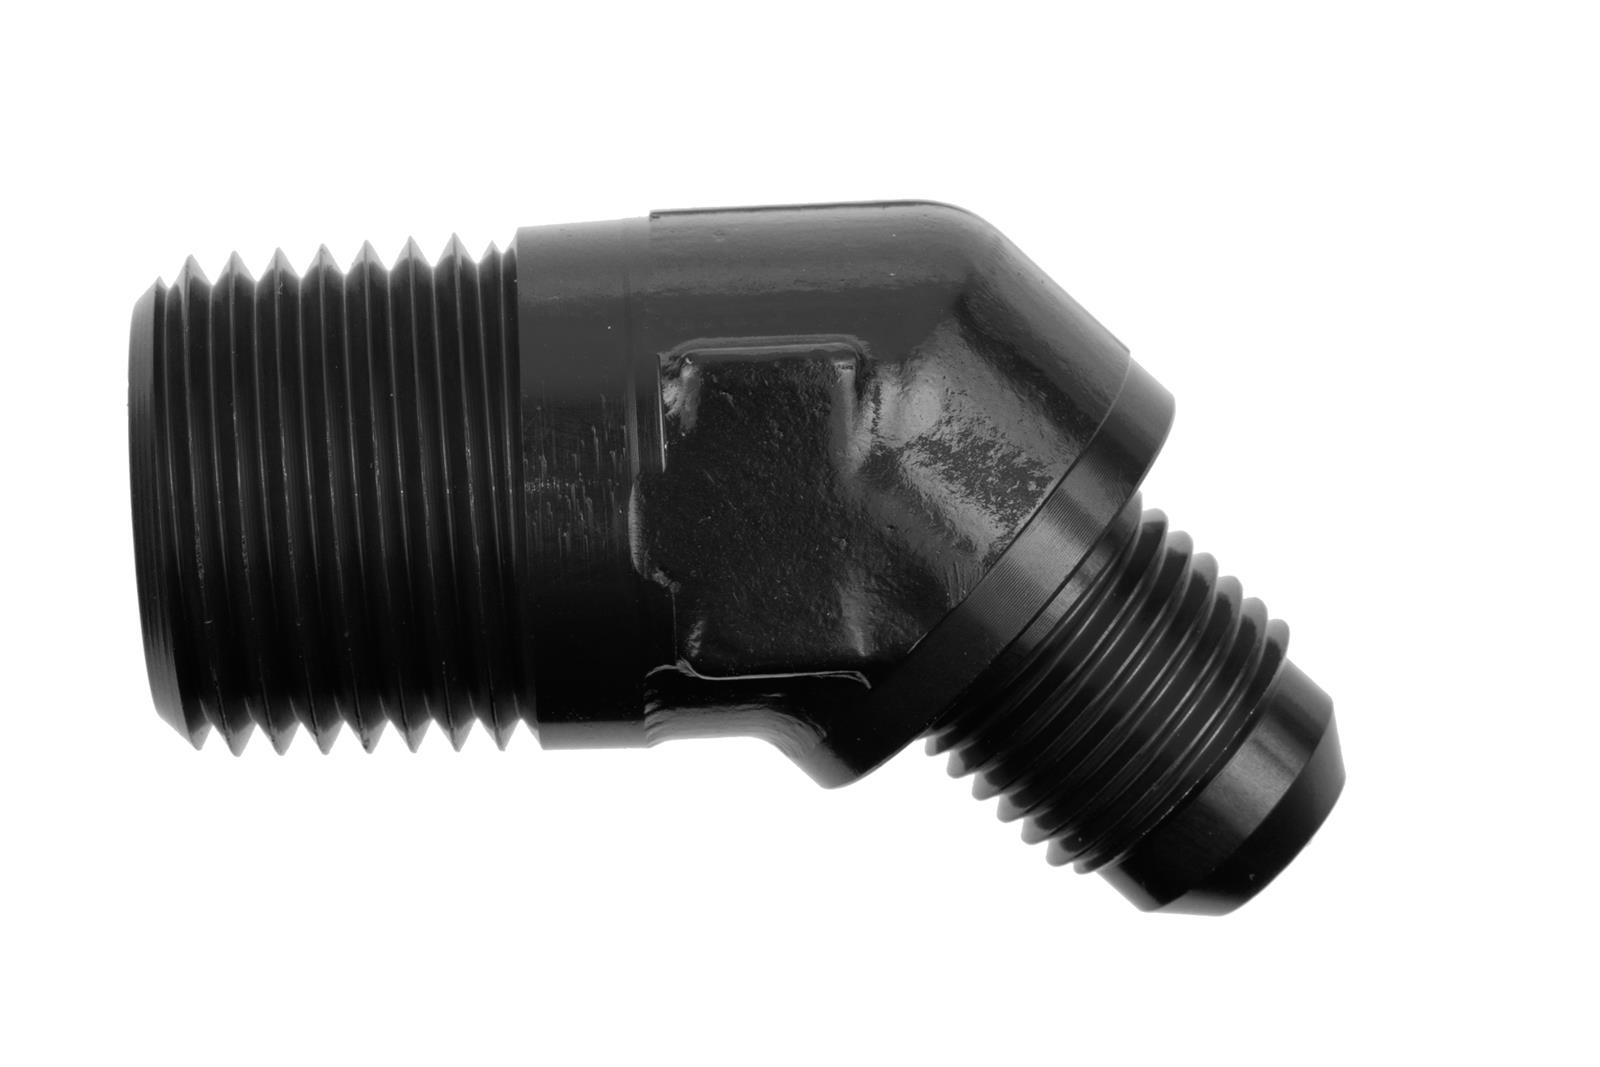 Redhorse Performance -04 45 degree male adapter to -04 (1/4″) NPT male